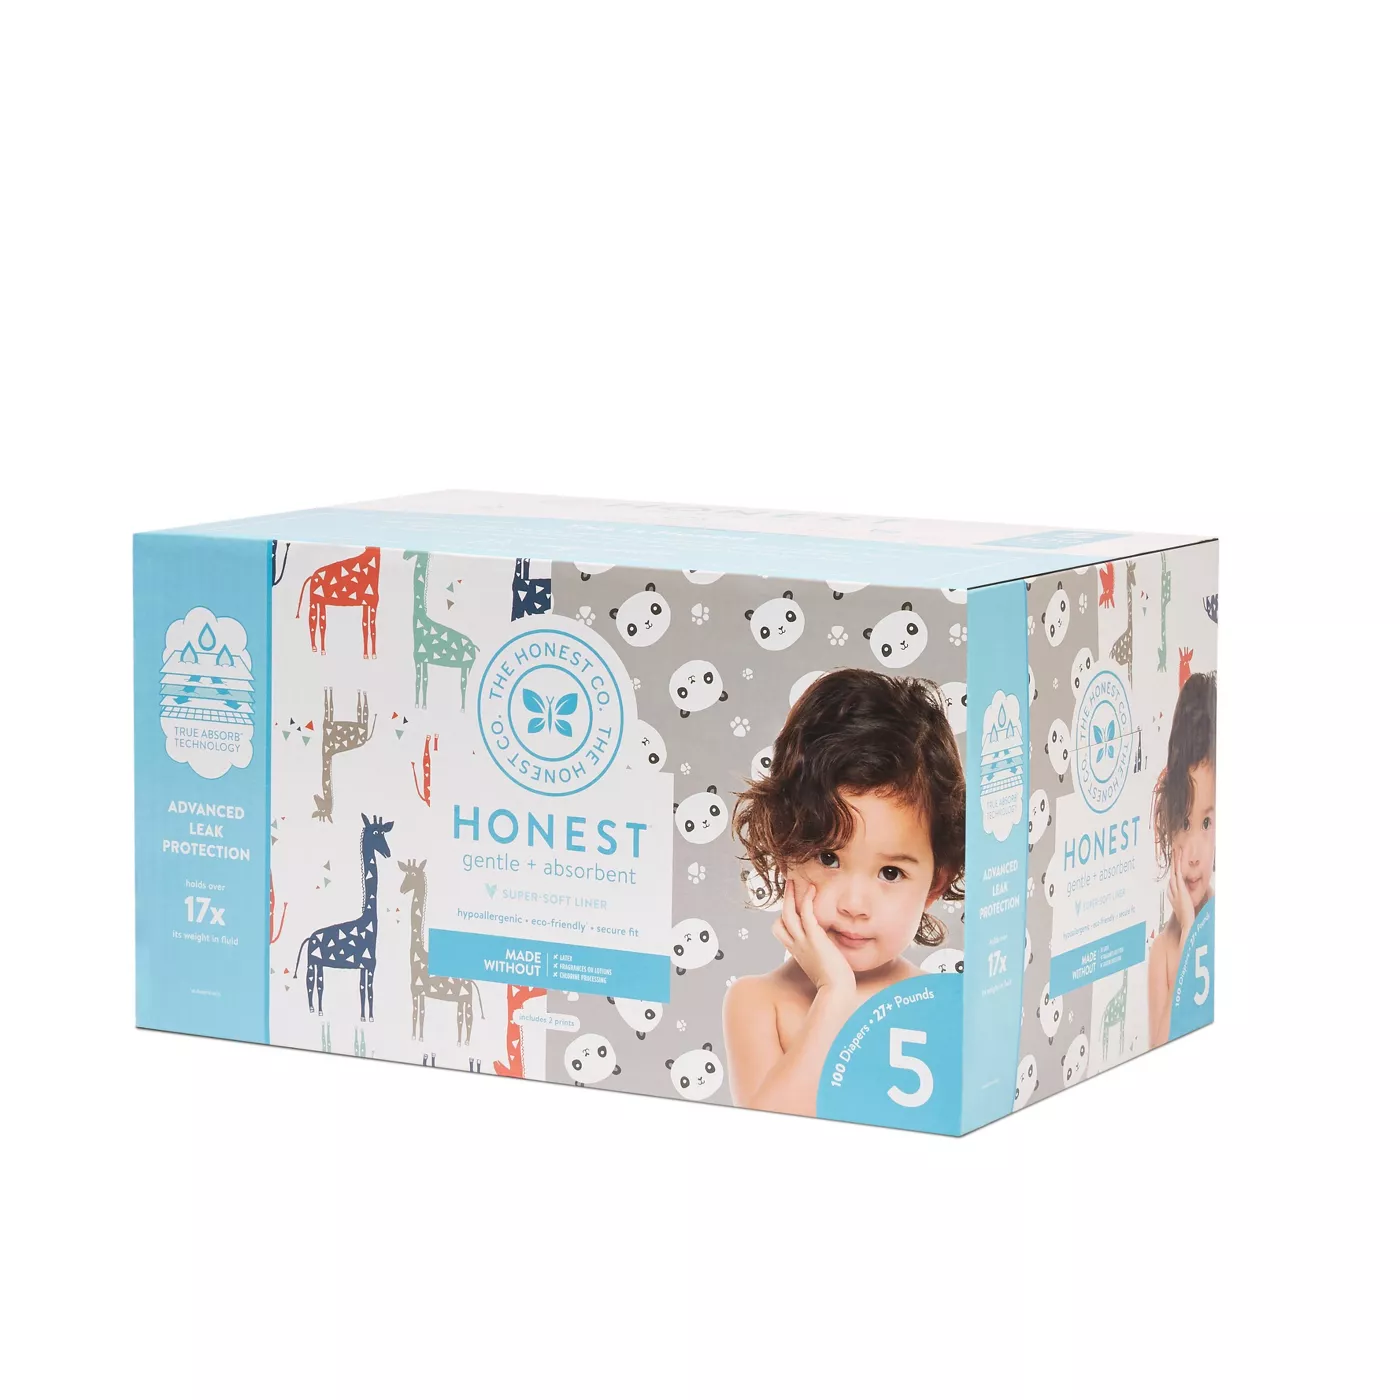 The Honest Company Disposable Diapers Super Club Box Pandas & Giraffes - Size 5 - 100ct - image 1 of 3